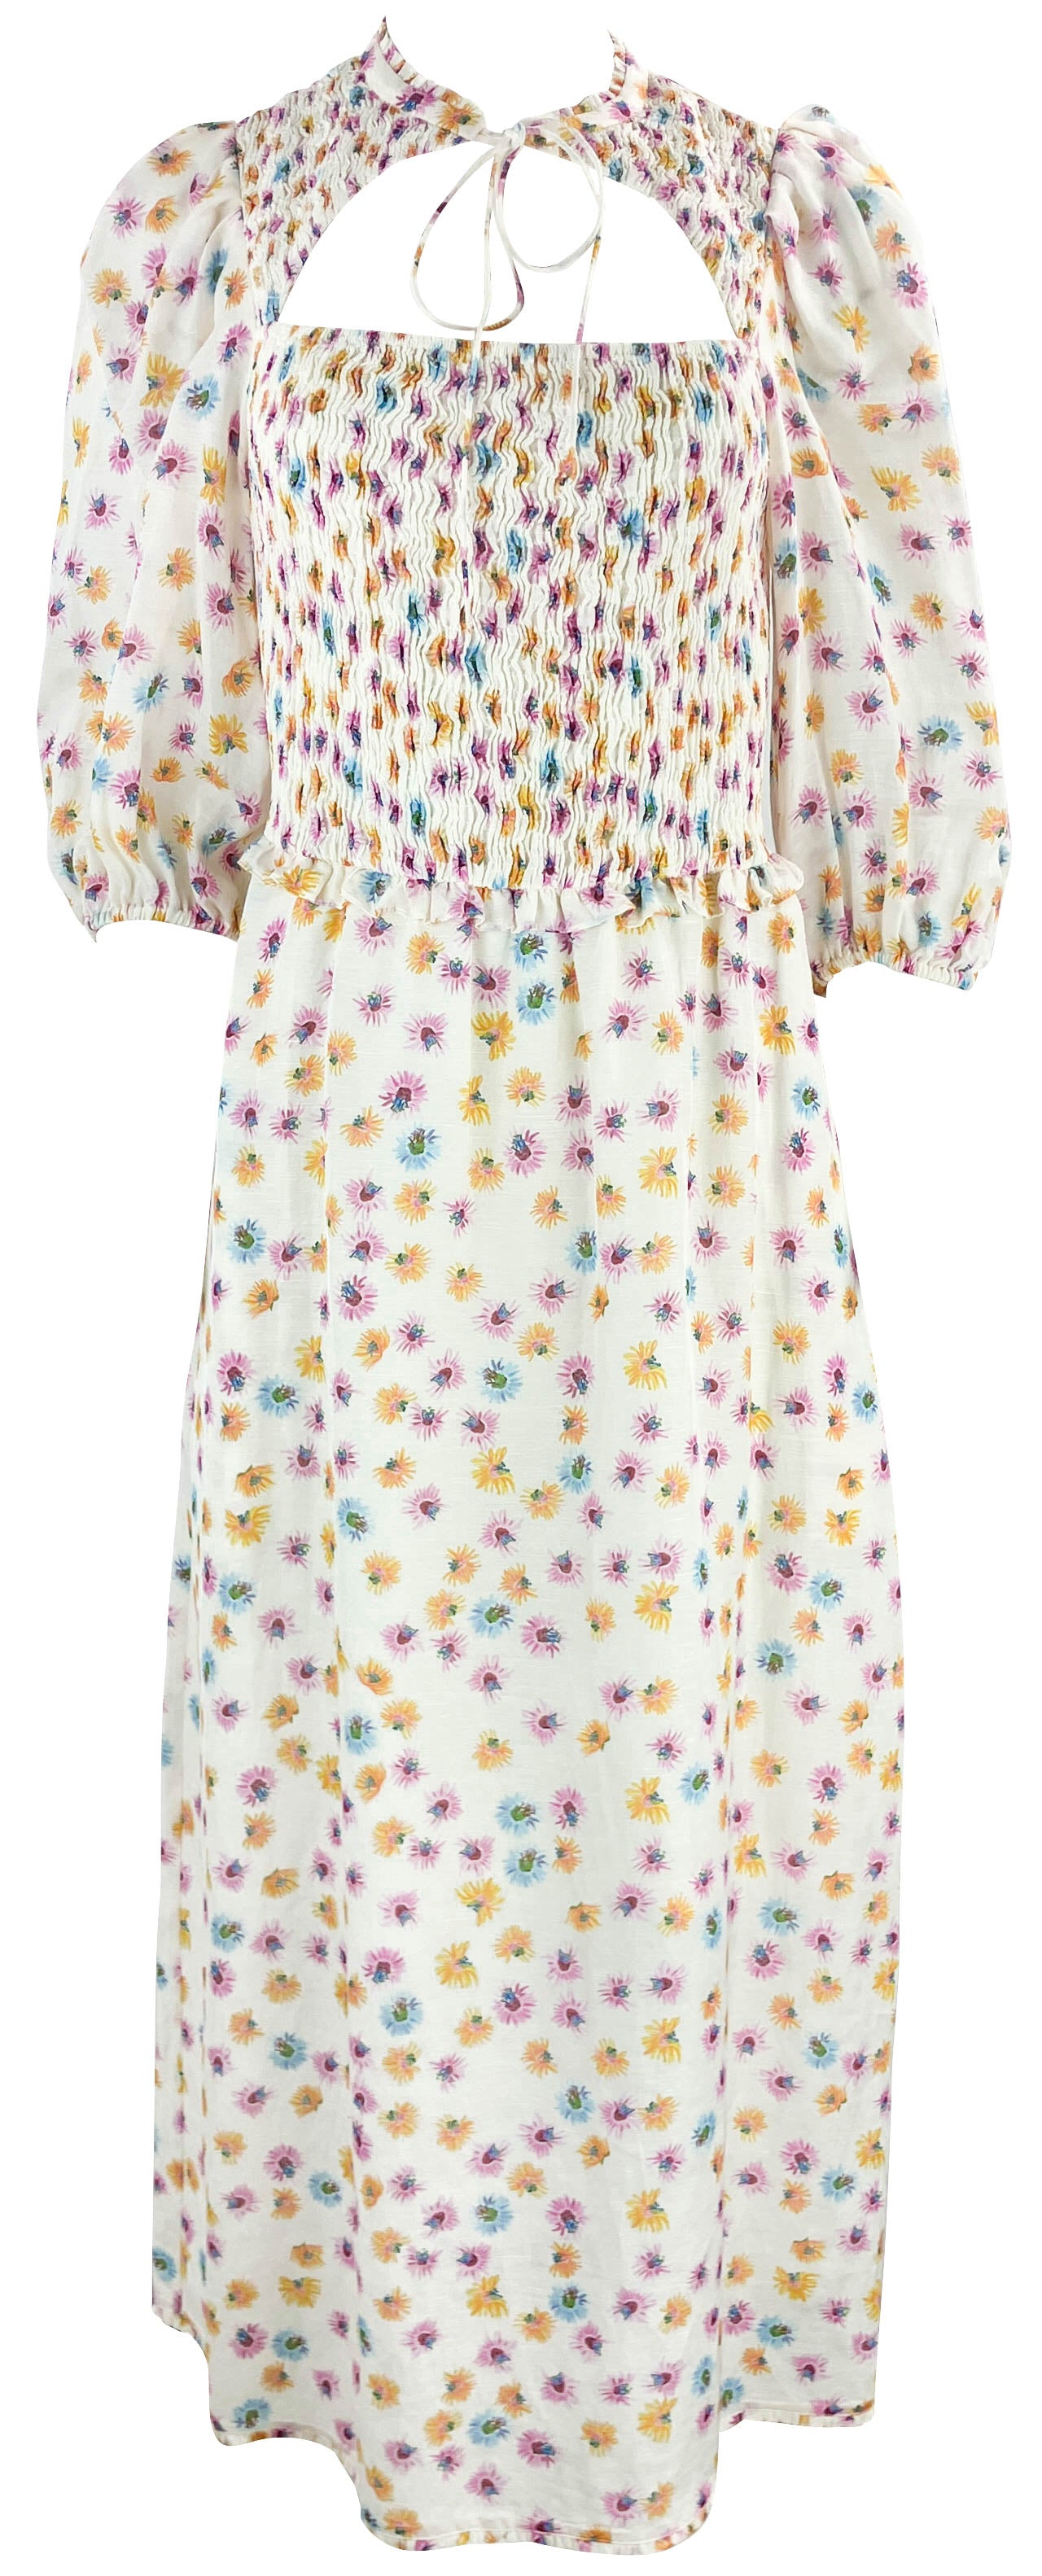 Dorothee Schumacher Structured Volumes Dress in Colorful Flowers - Discounts on Dorothee Schumacher at UAL